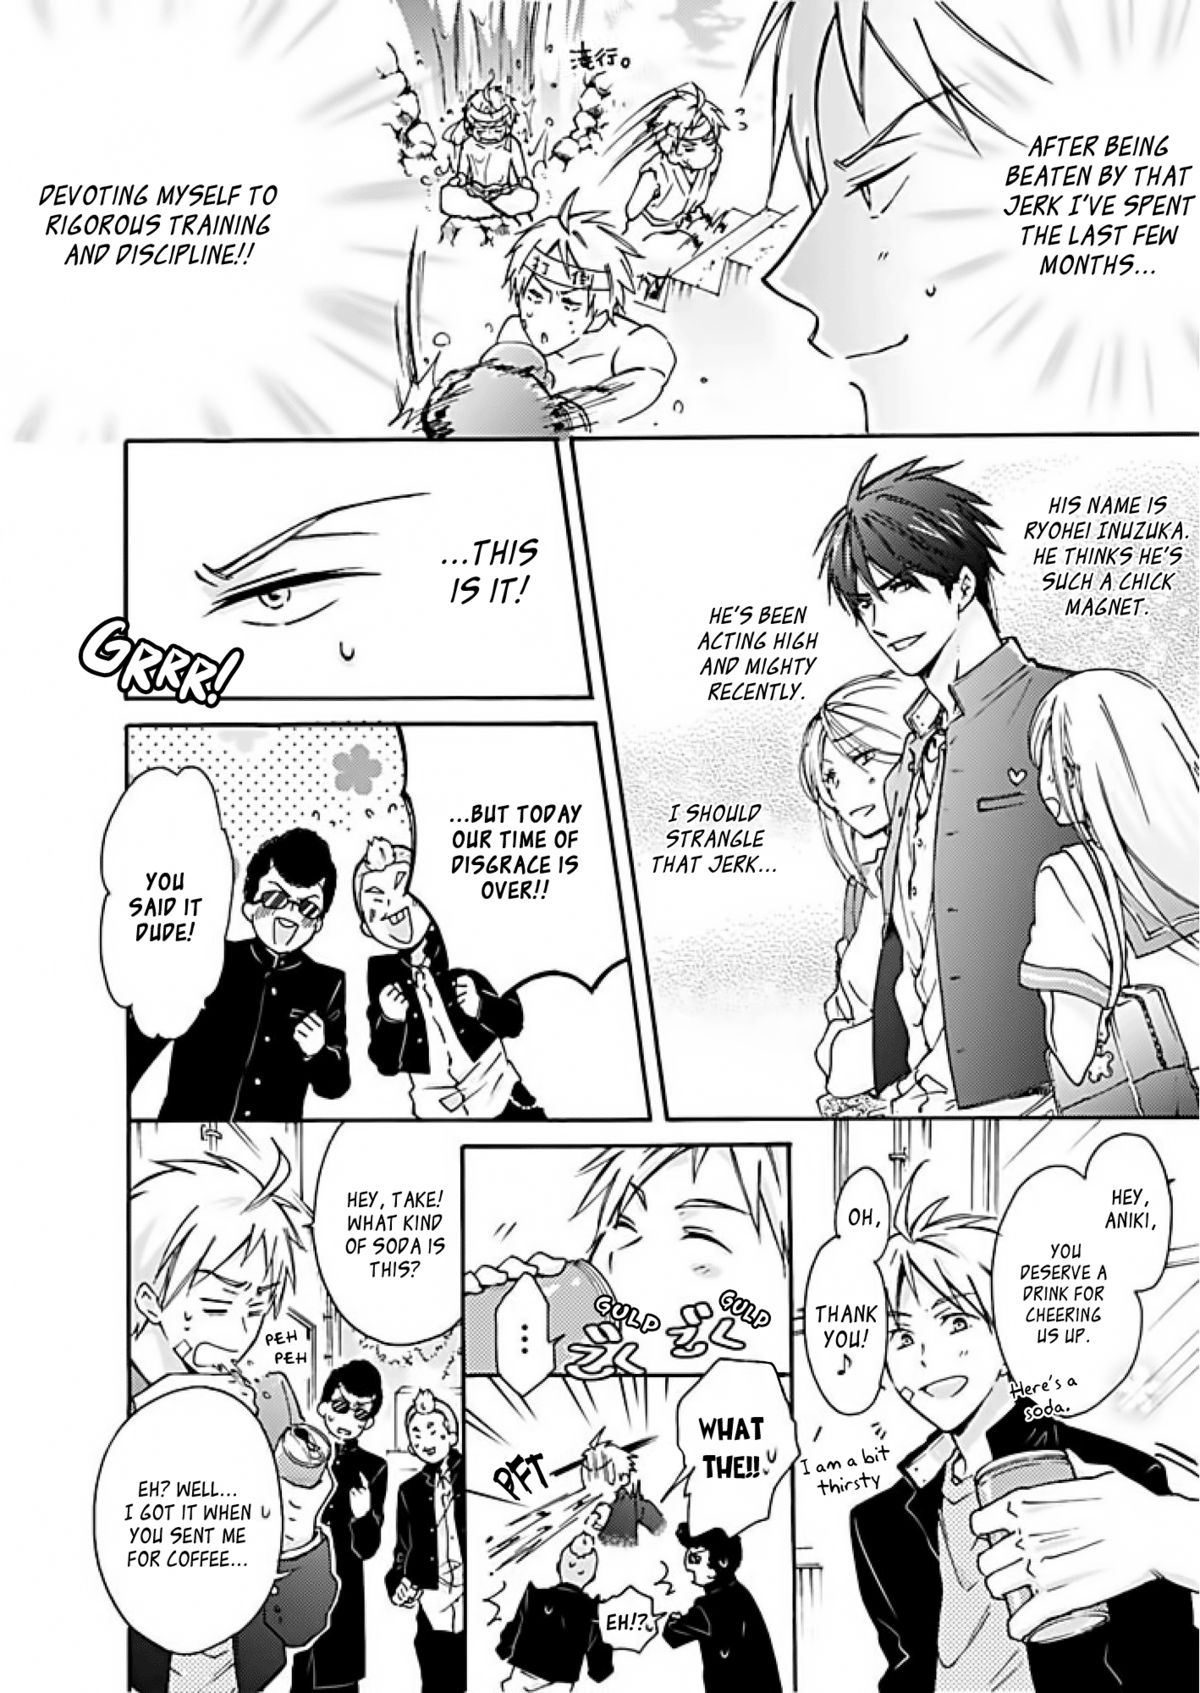 [Takao Yori] Genderbender Yankee School ☆ They're Trying to Take My First Time. [English] page 3 full